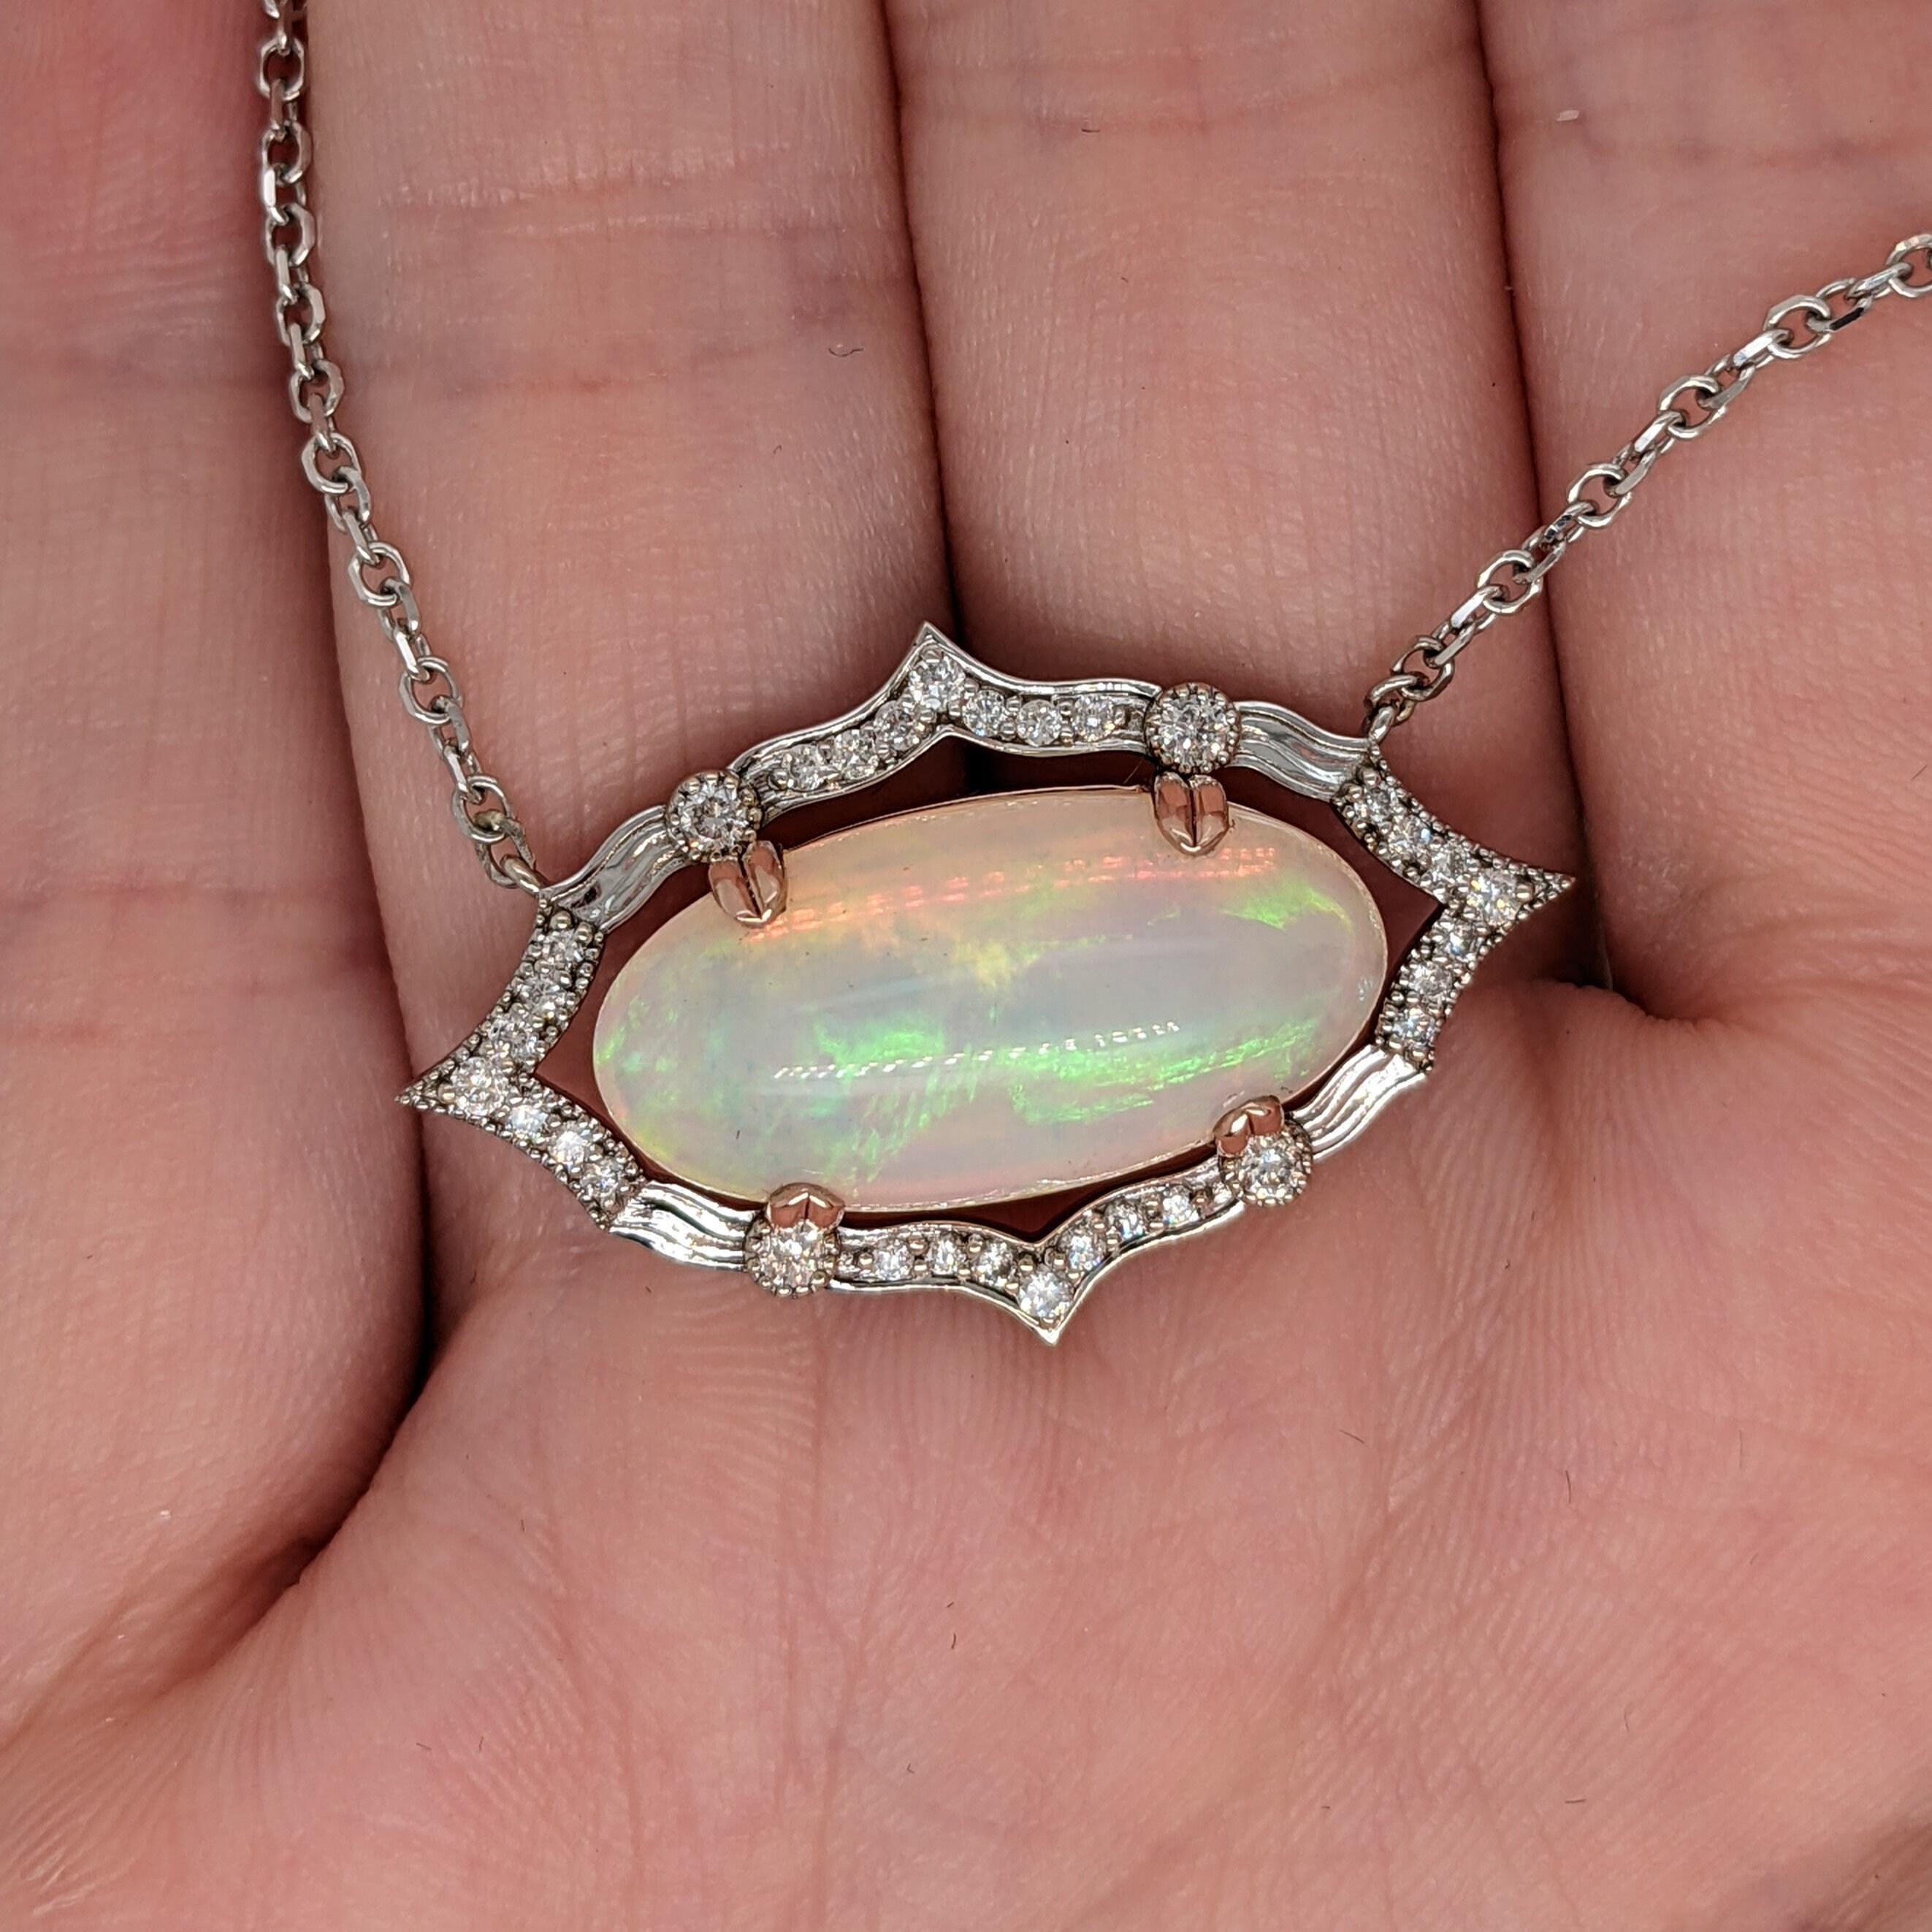 This gorgeous large Ethiopian Opal shines in this unique vintage style 14k dual rose and white gold pendant with two sizes of round diamond accents.

Perfect for gifts, anniversaries, or any special occasion! 

Specifications

Item Type: Pendant